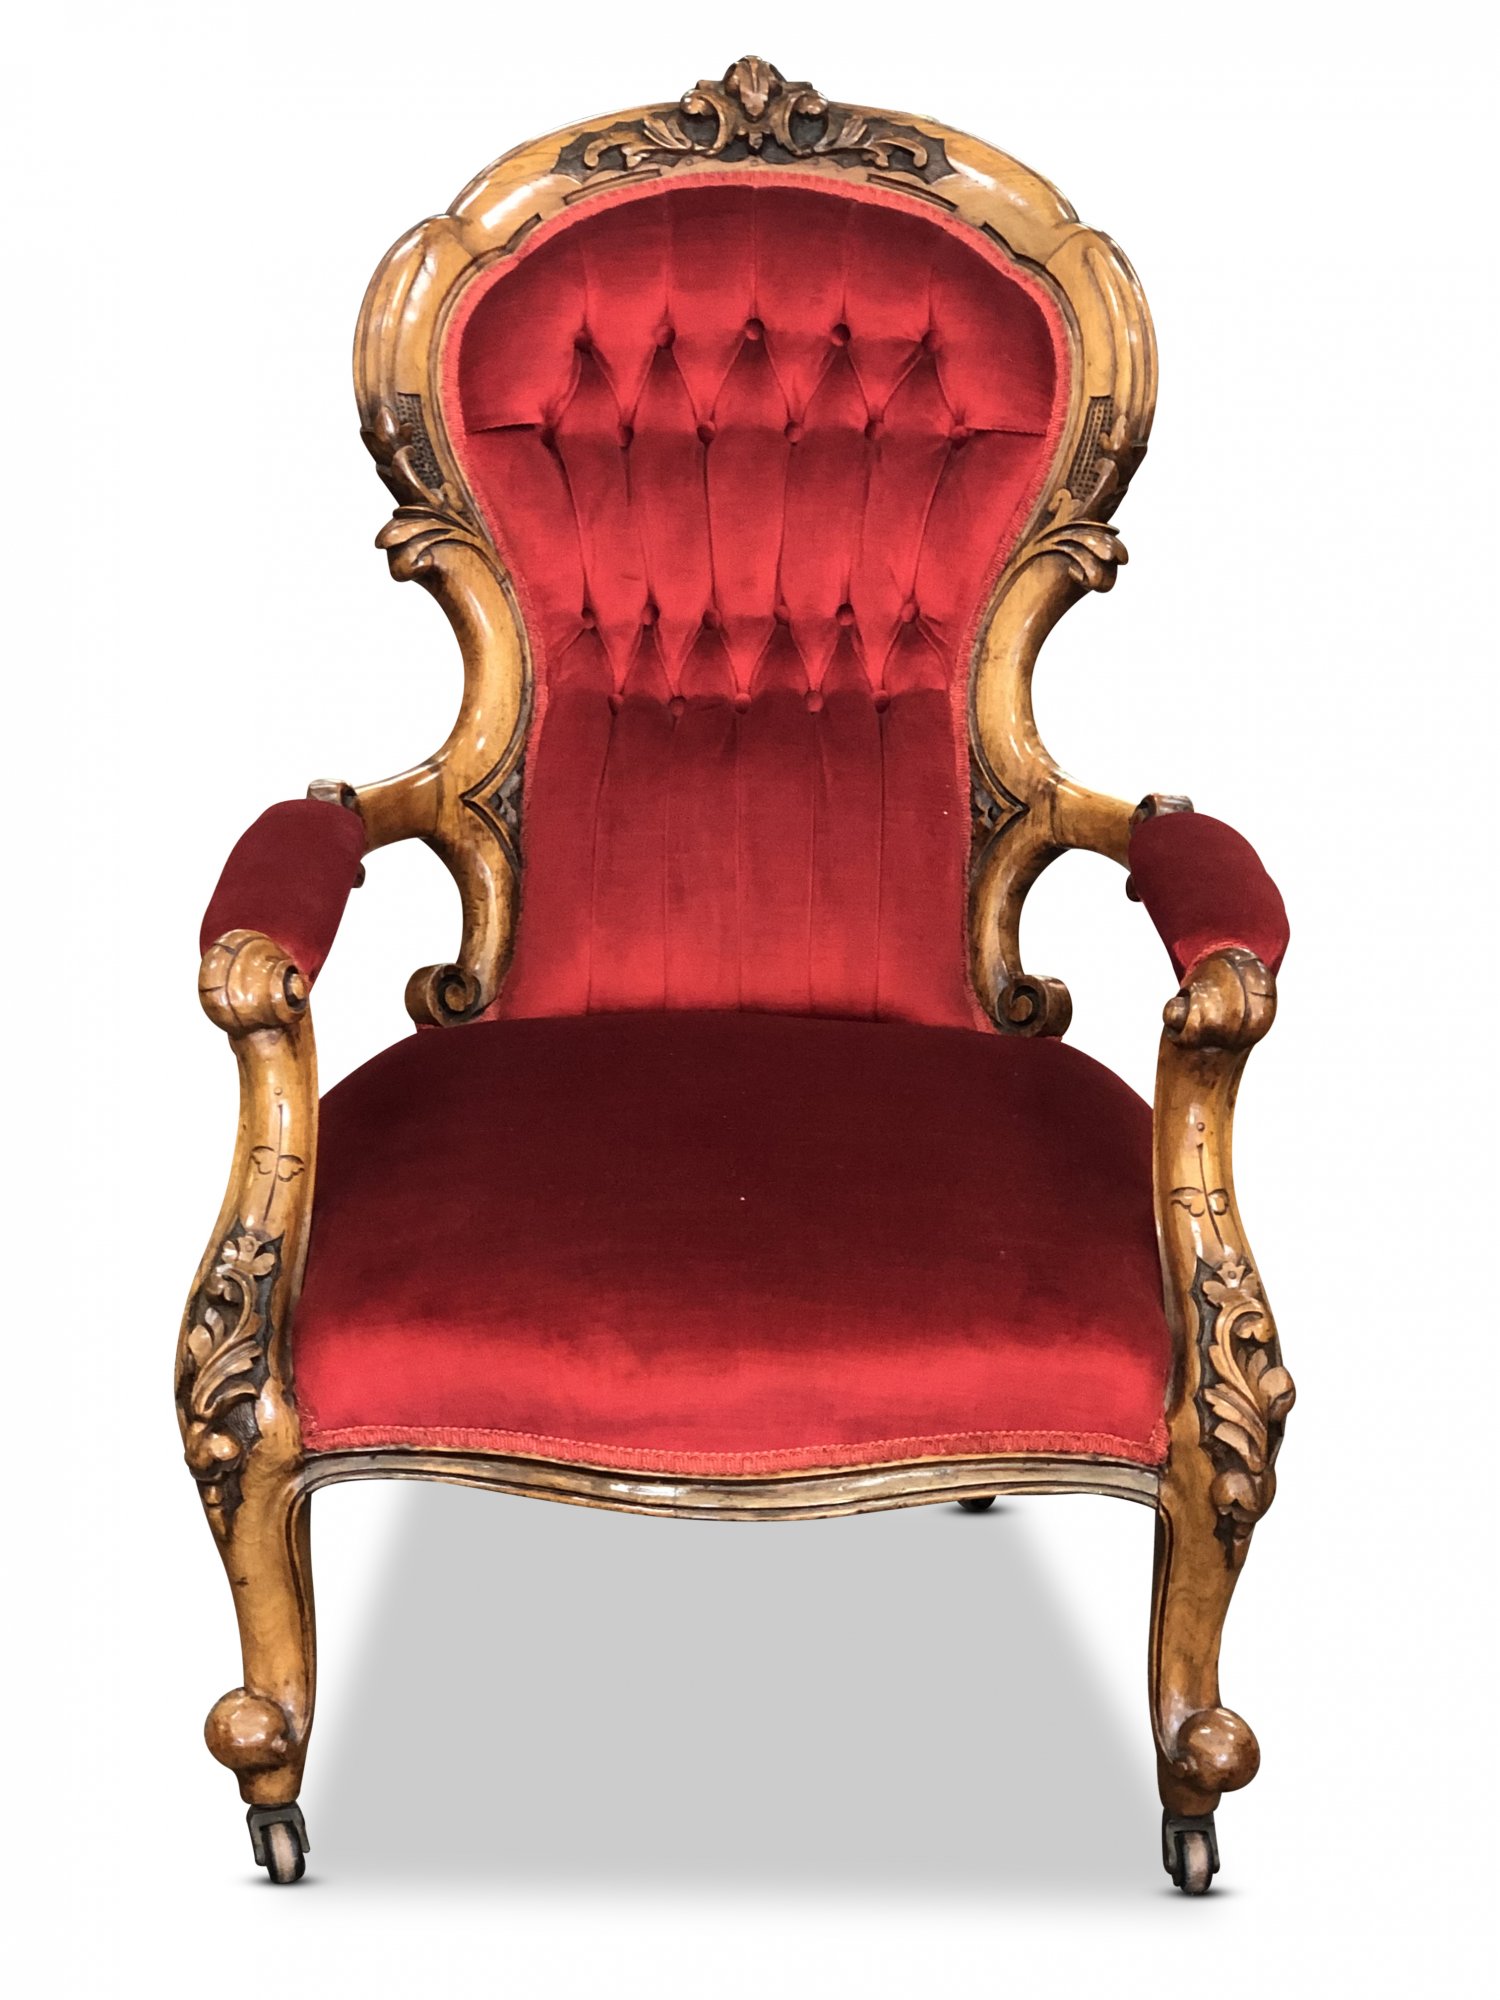 Victorian ornately carved walnut gentleman’s chair, with red velvet upholstery featuring deep diamond buttoning